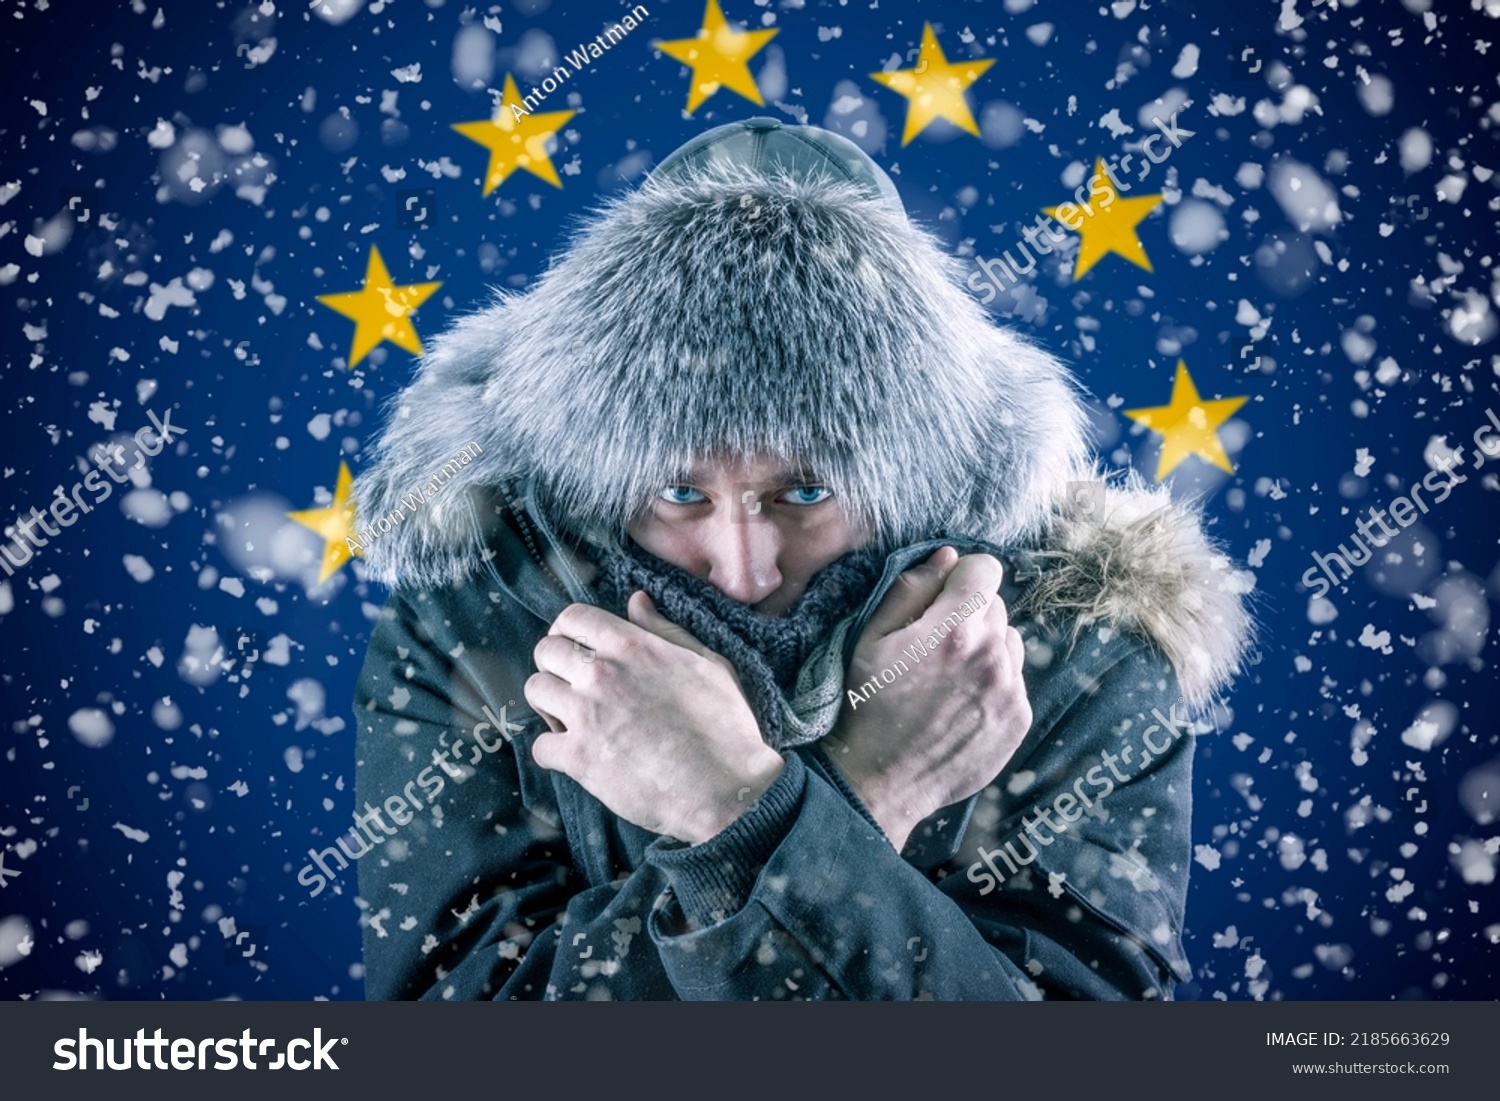 Transition to renewable energy sources. Energy crisis in Europe. A citizen of Europe freezes in front of the flag. Increase in the price of natural gas for home heating. #2185663629